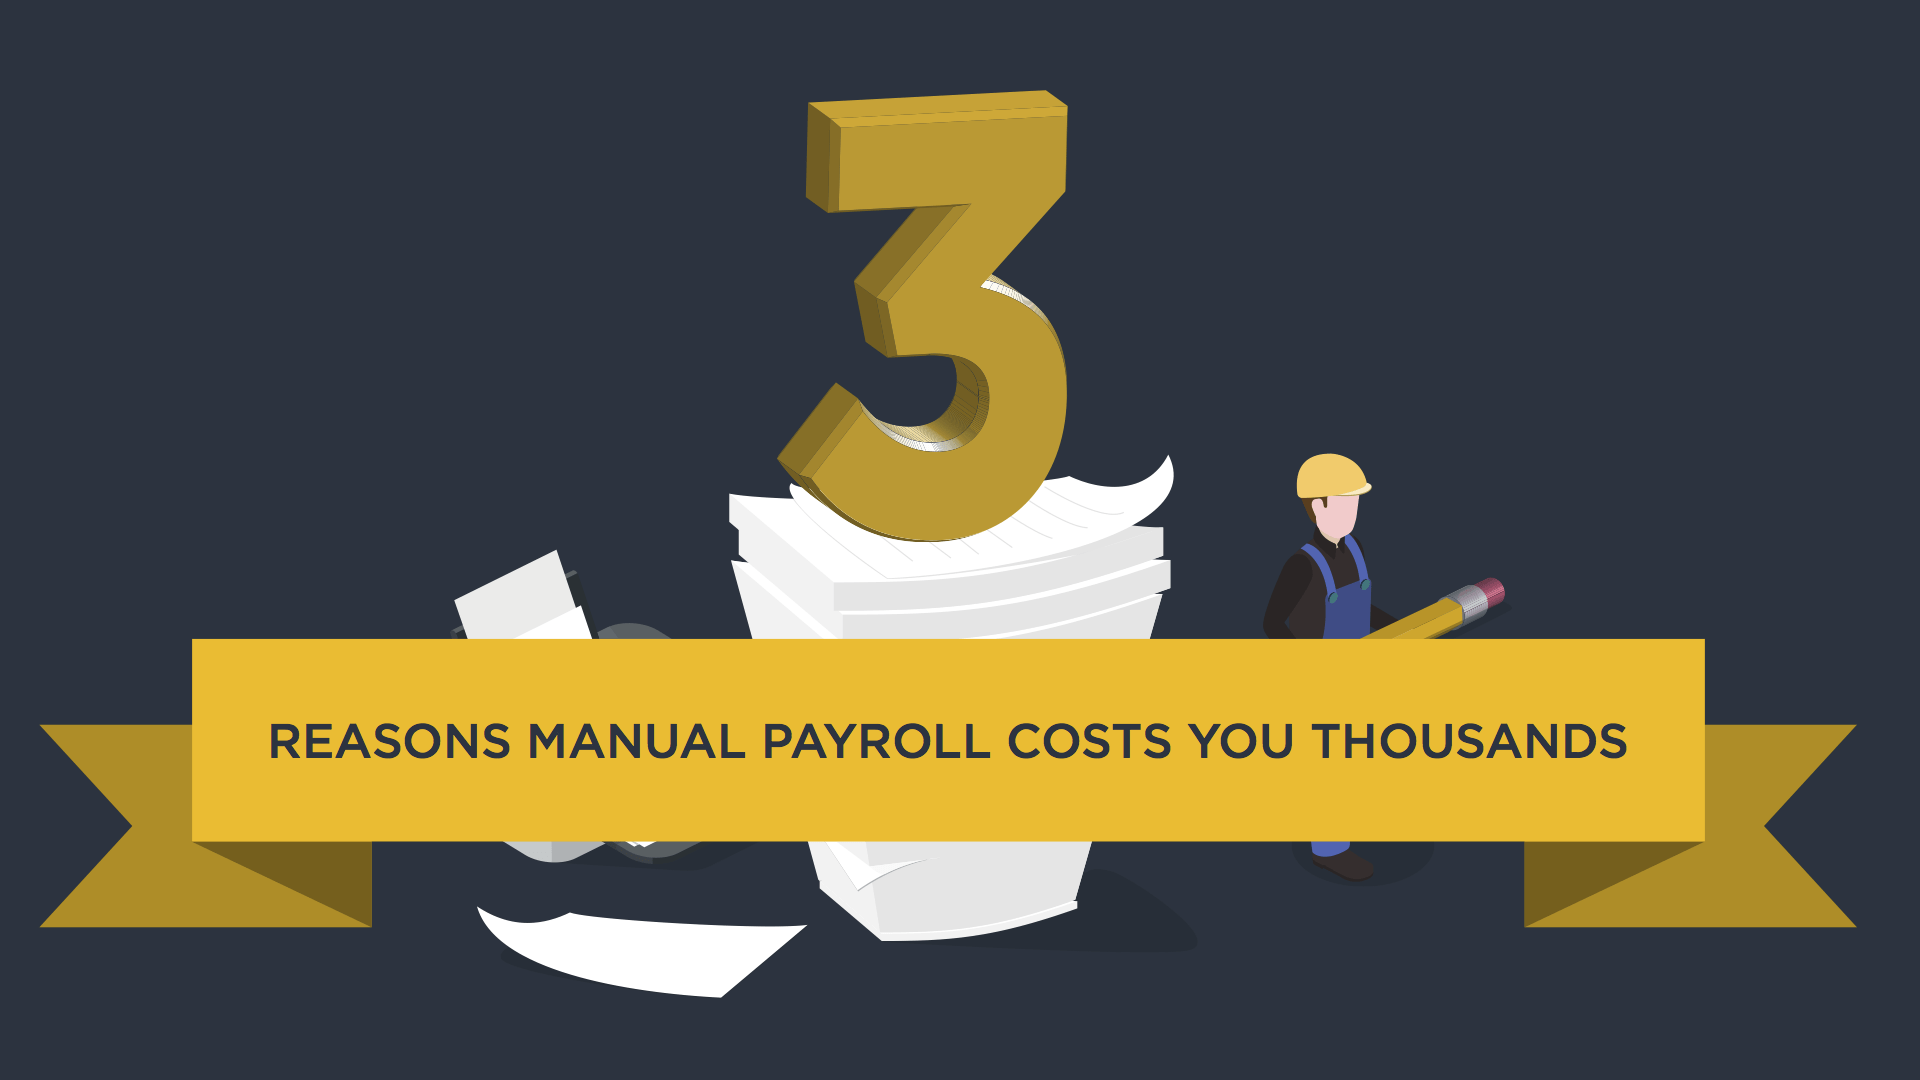 reasons why manual payroll costs thousands